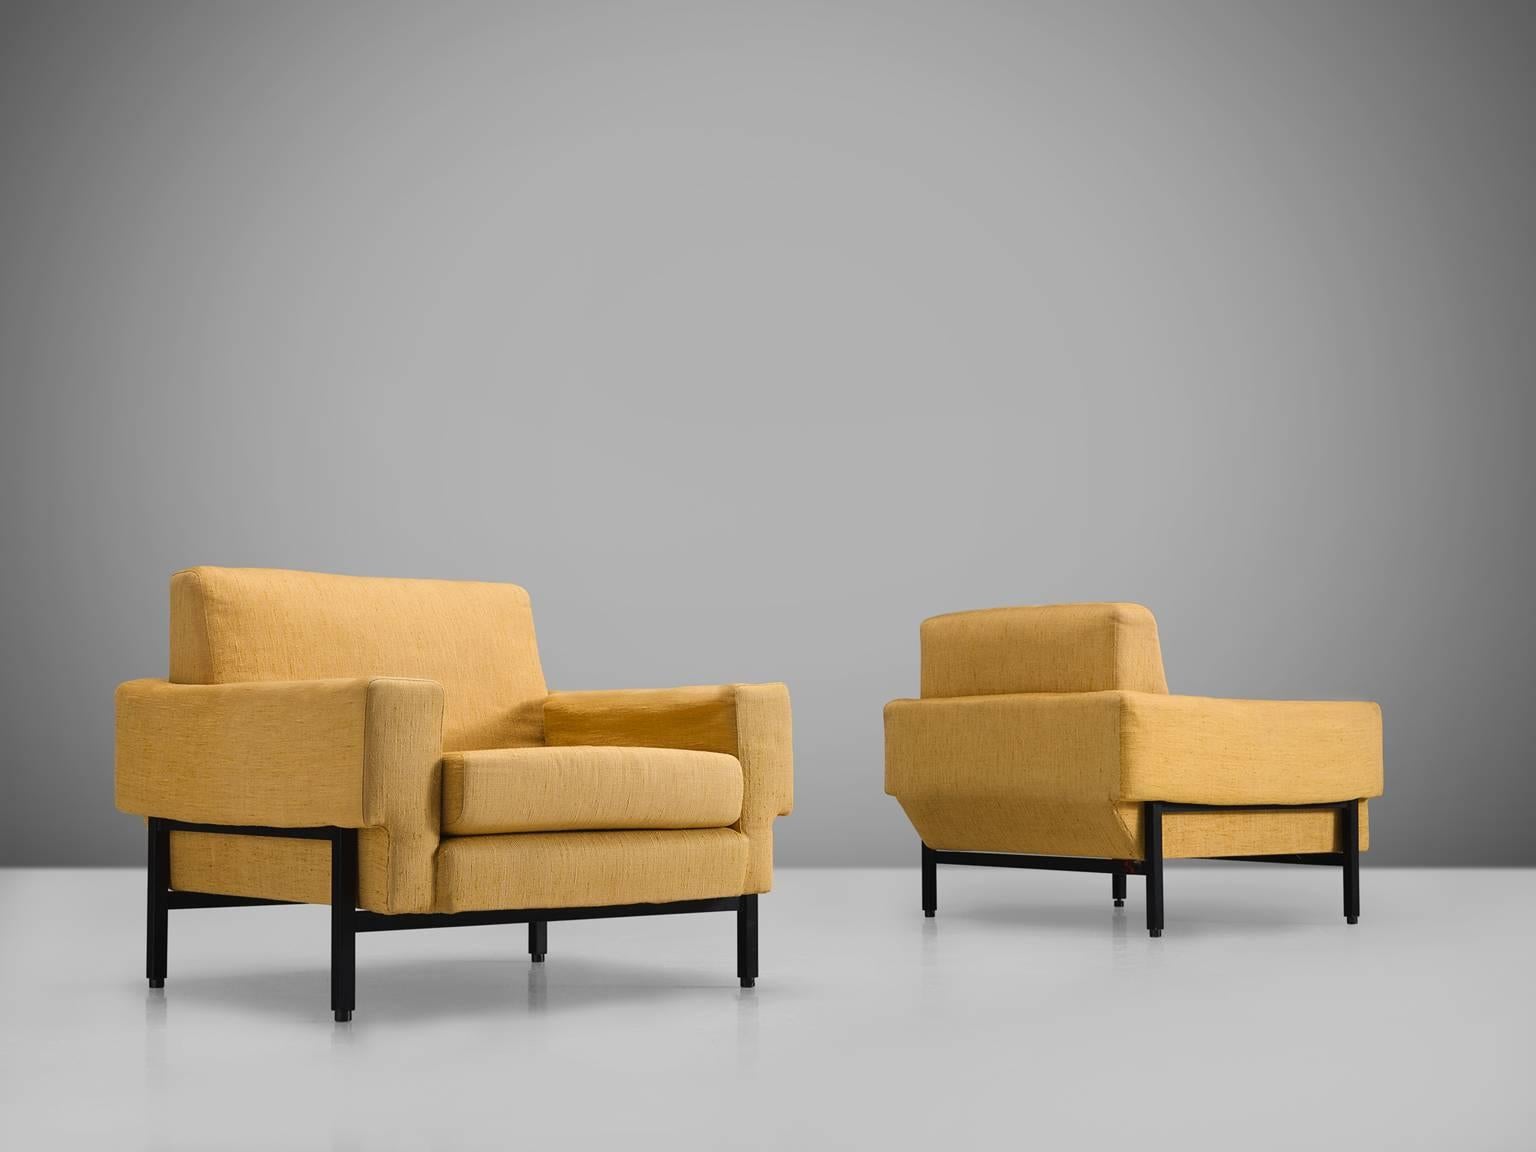 Saporiti, club chairs in yellow fabric, black metal Italy, 1960s.

These chairs, equipped with a metal frame feature a very distinctive sloped back at the bottom. The frame is black and forms a wonderful contrast to the yellow upholstered